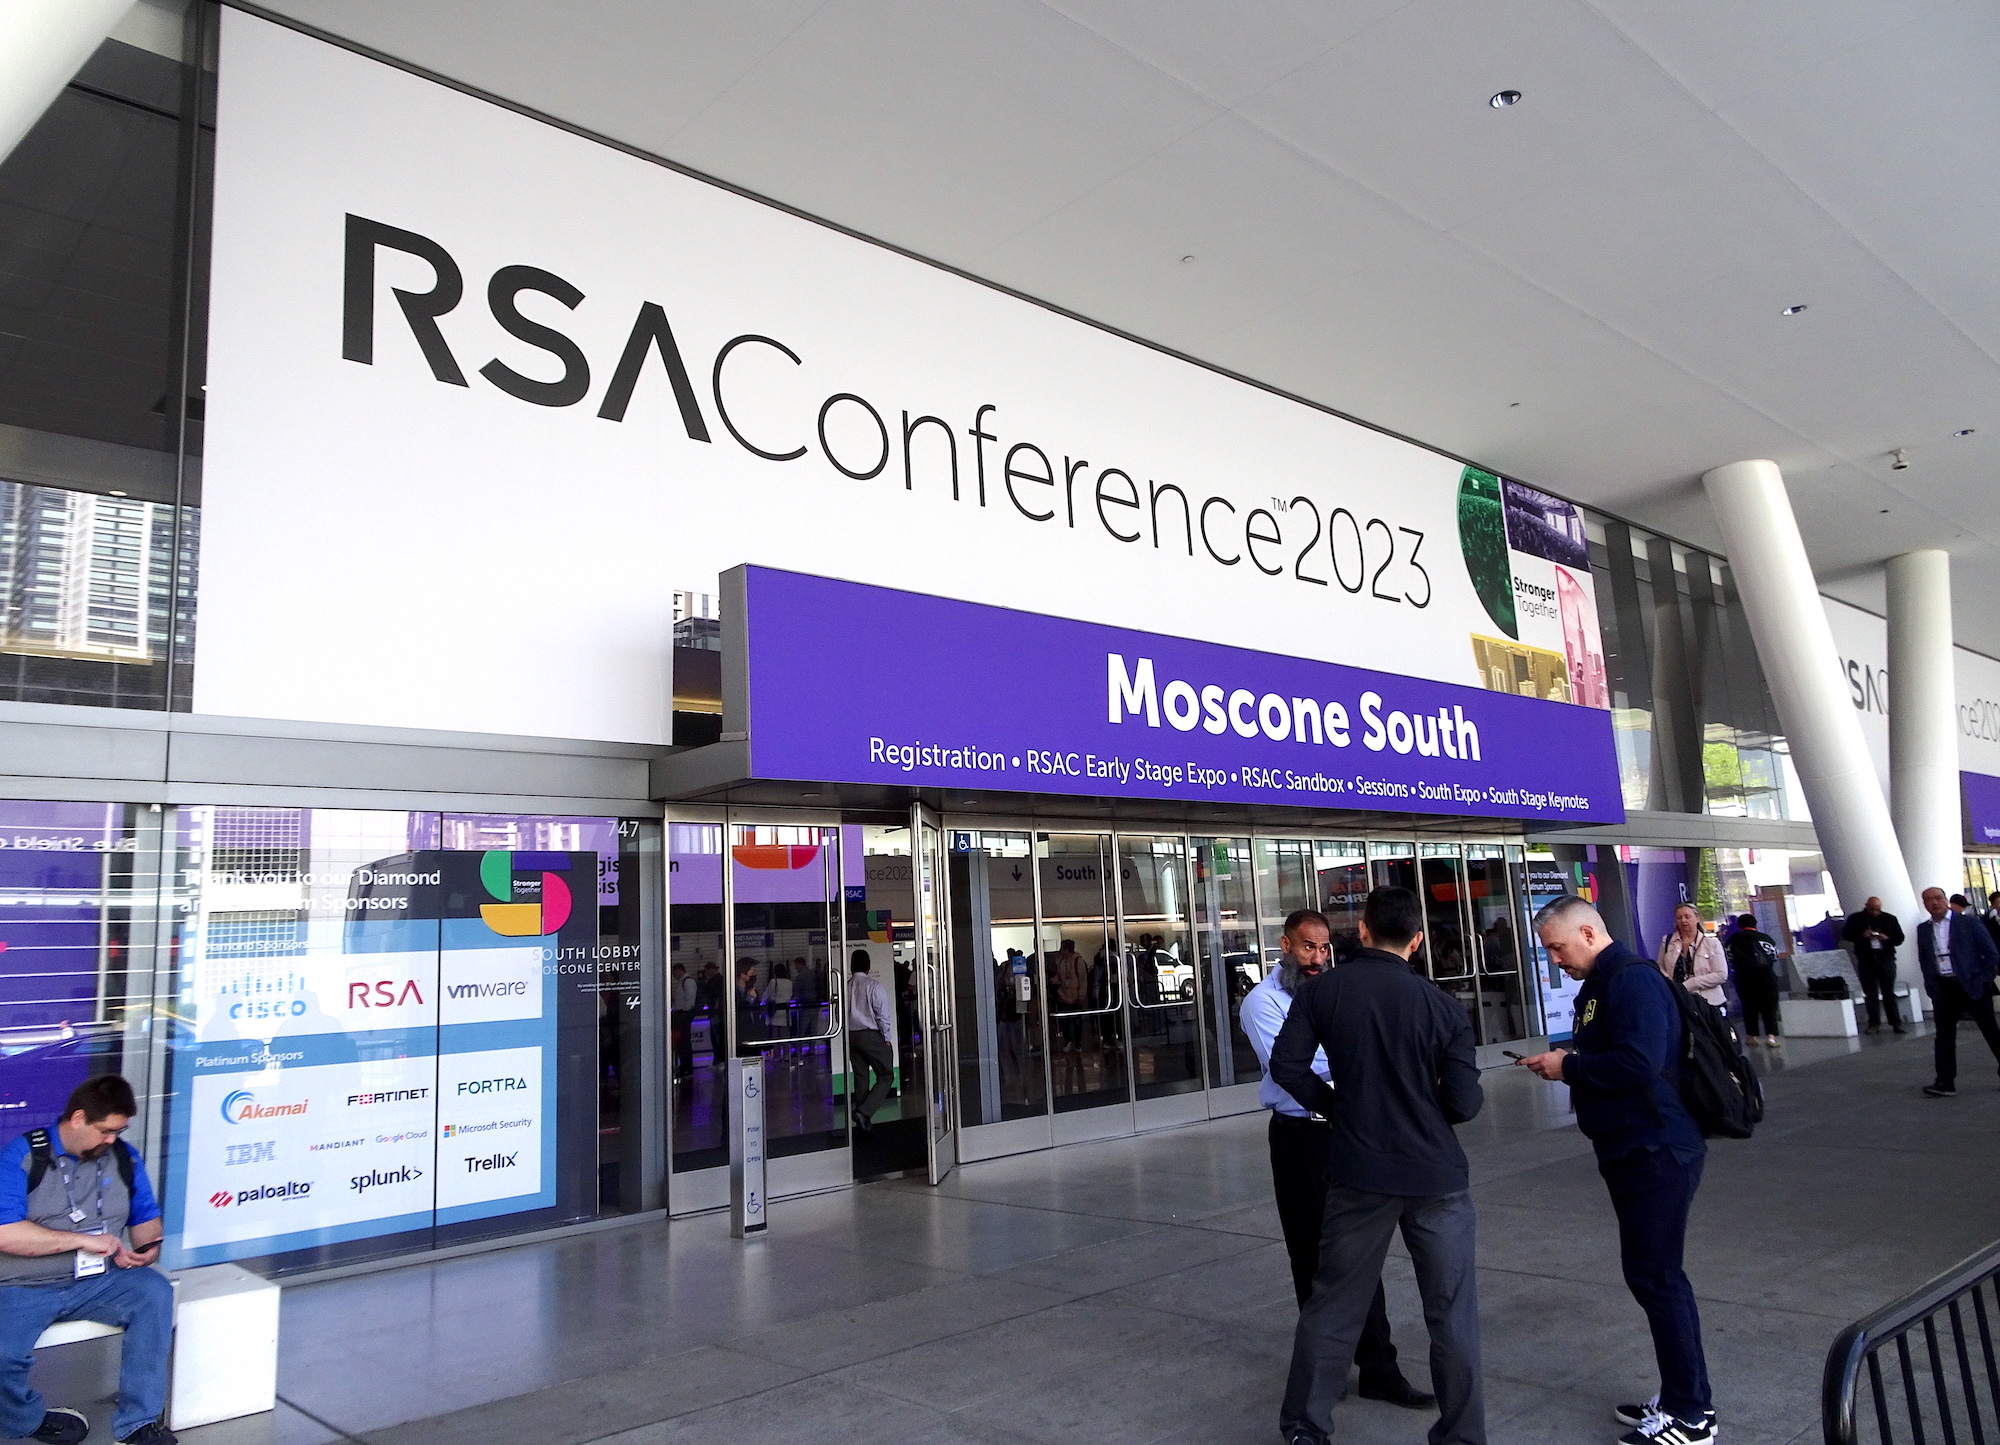 Innovation targets hard problems at RSA Conference